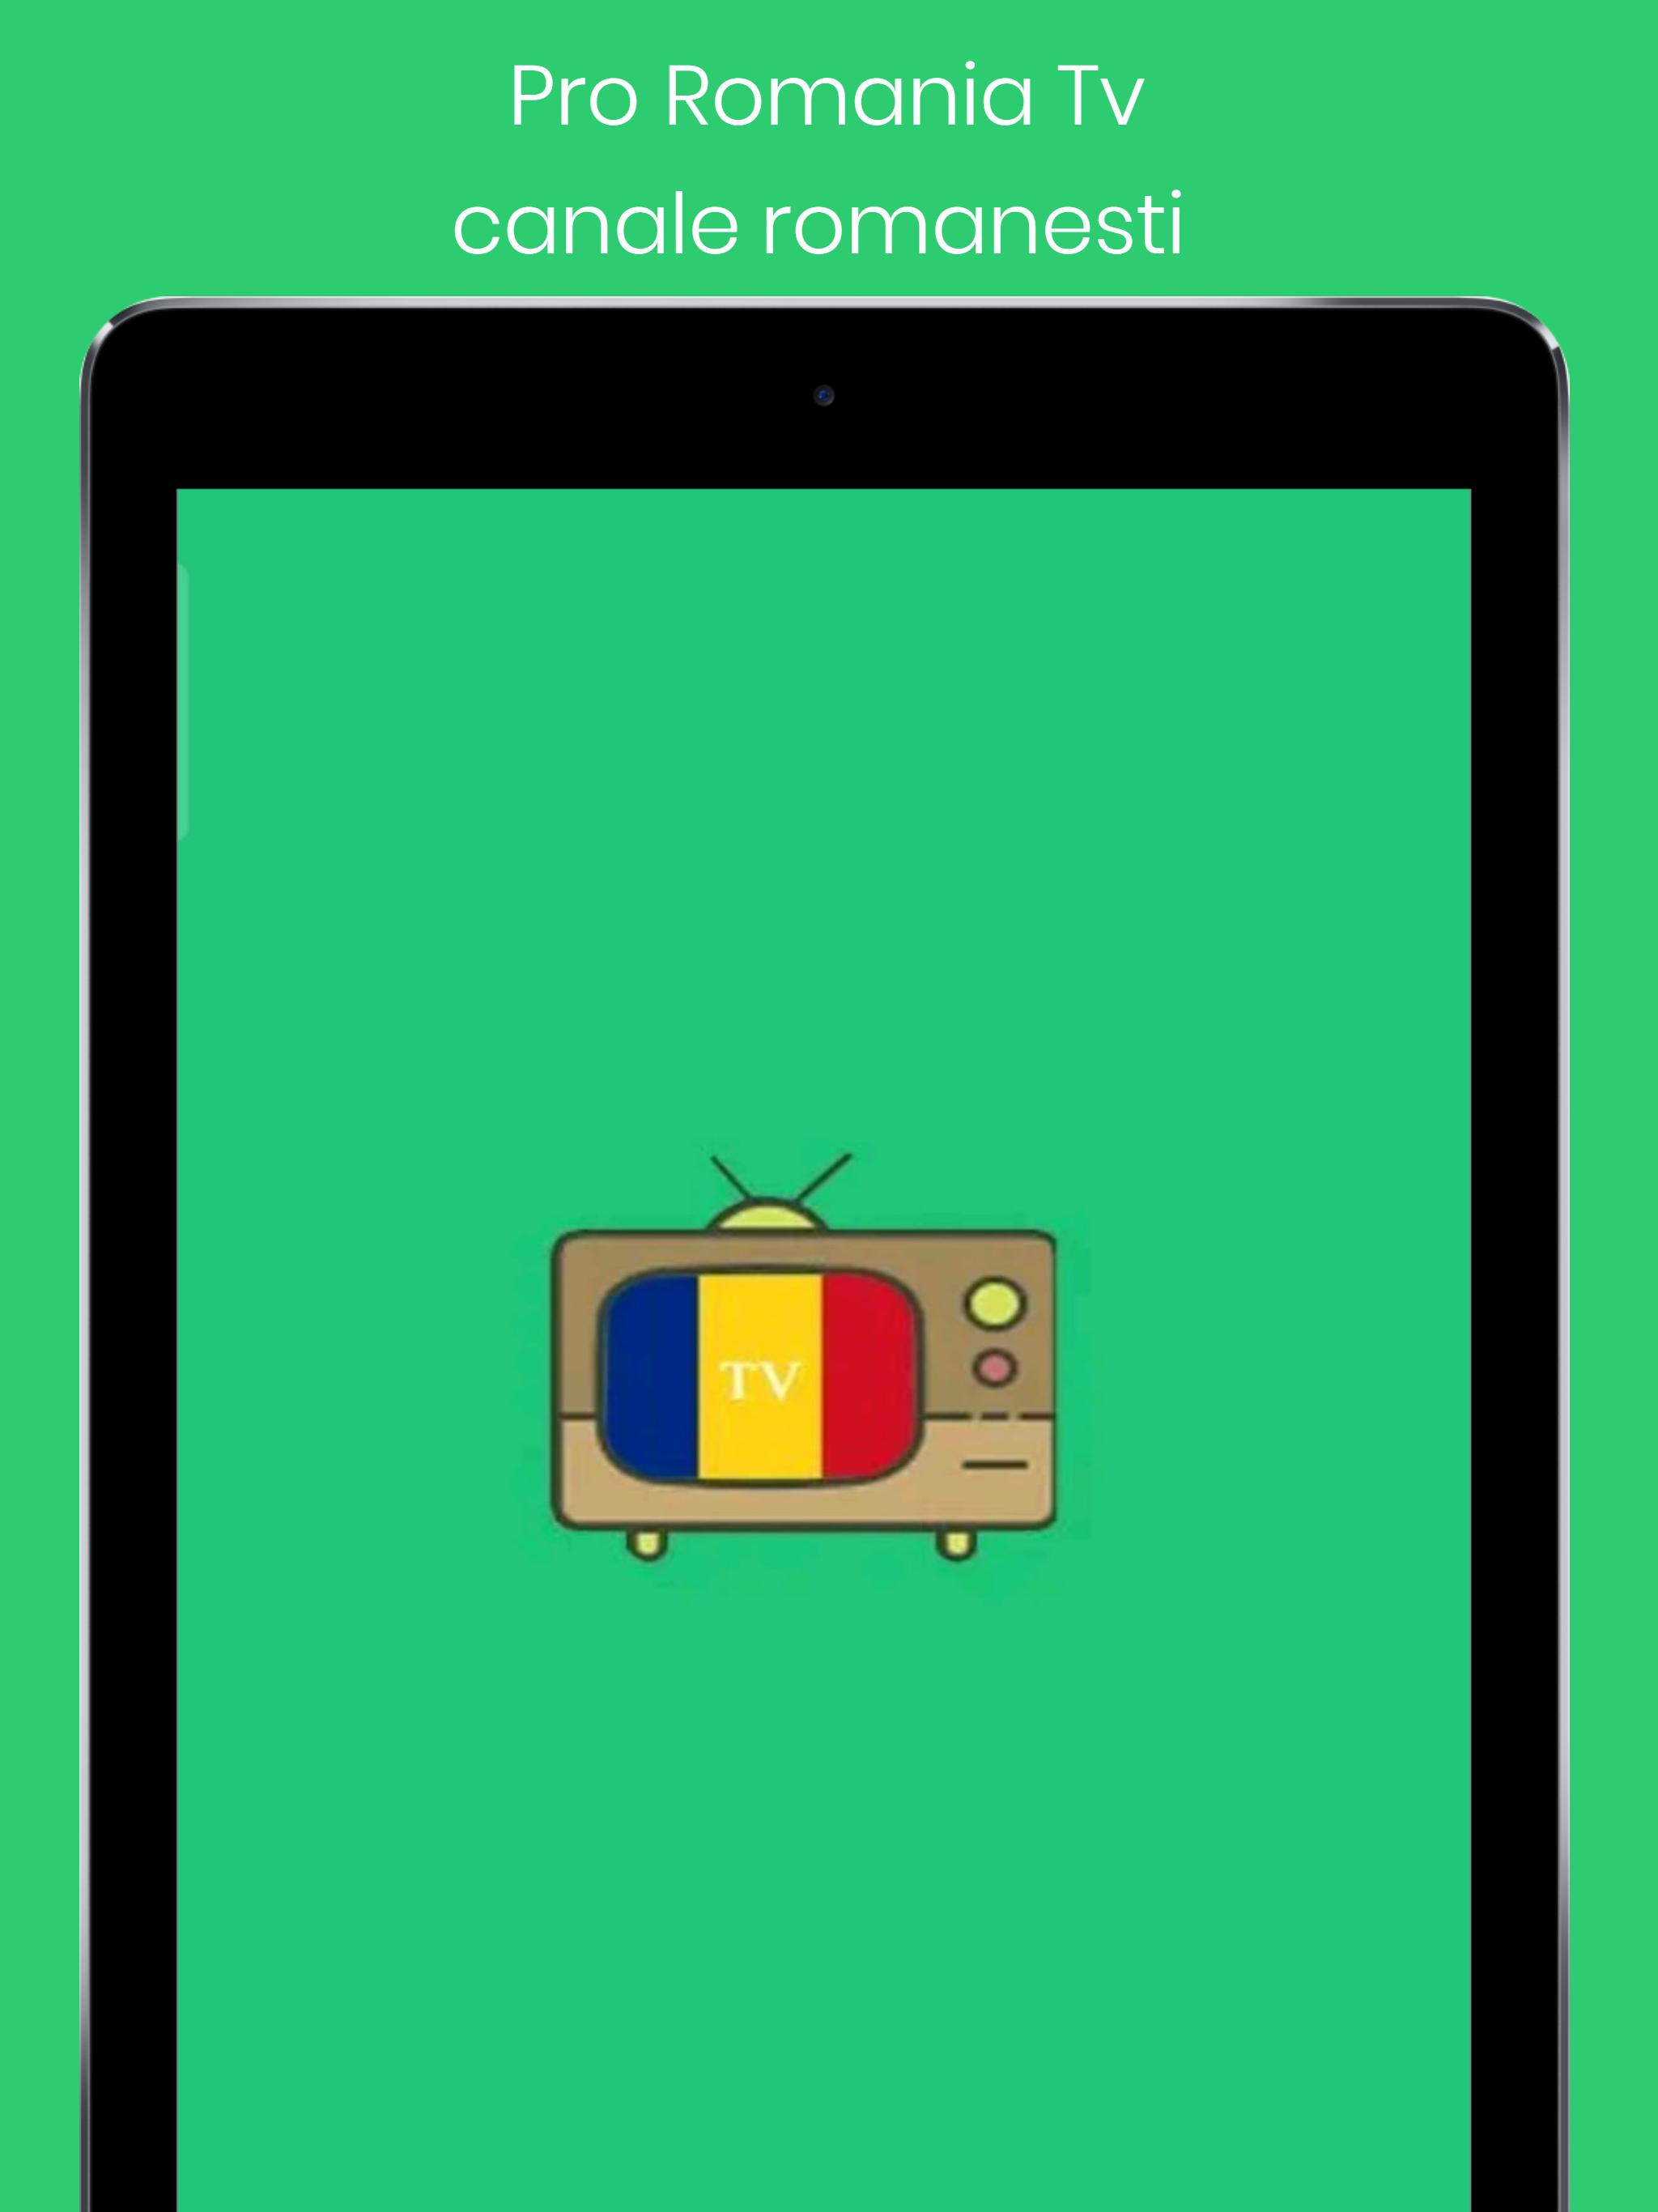 Pro Romania Tv for Android - APK Download